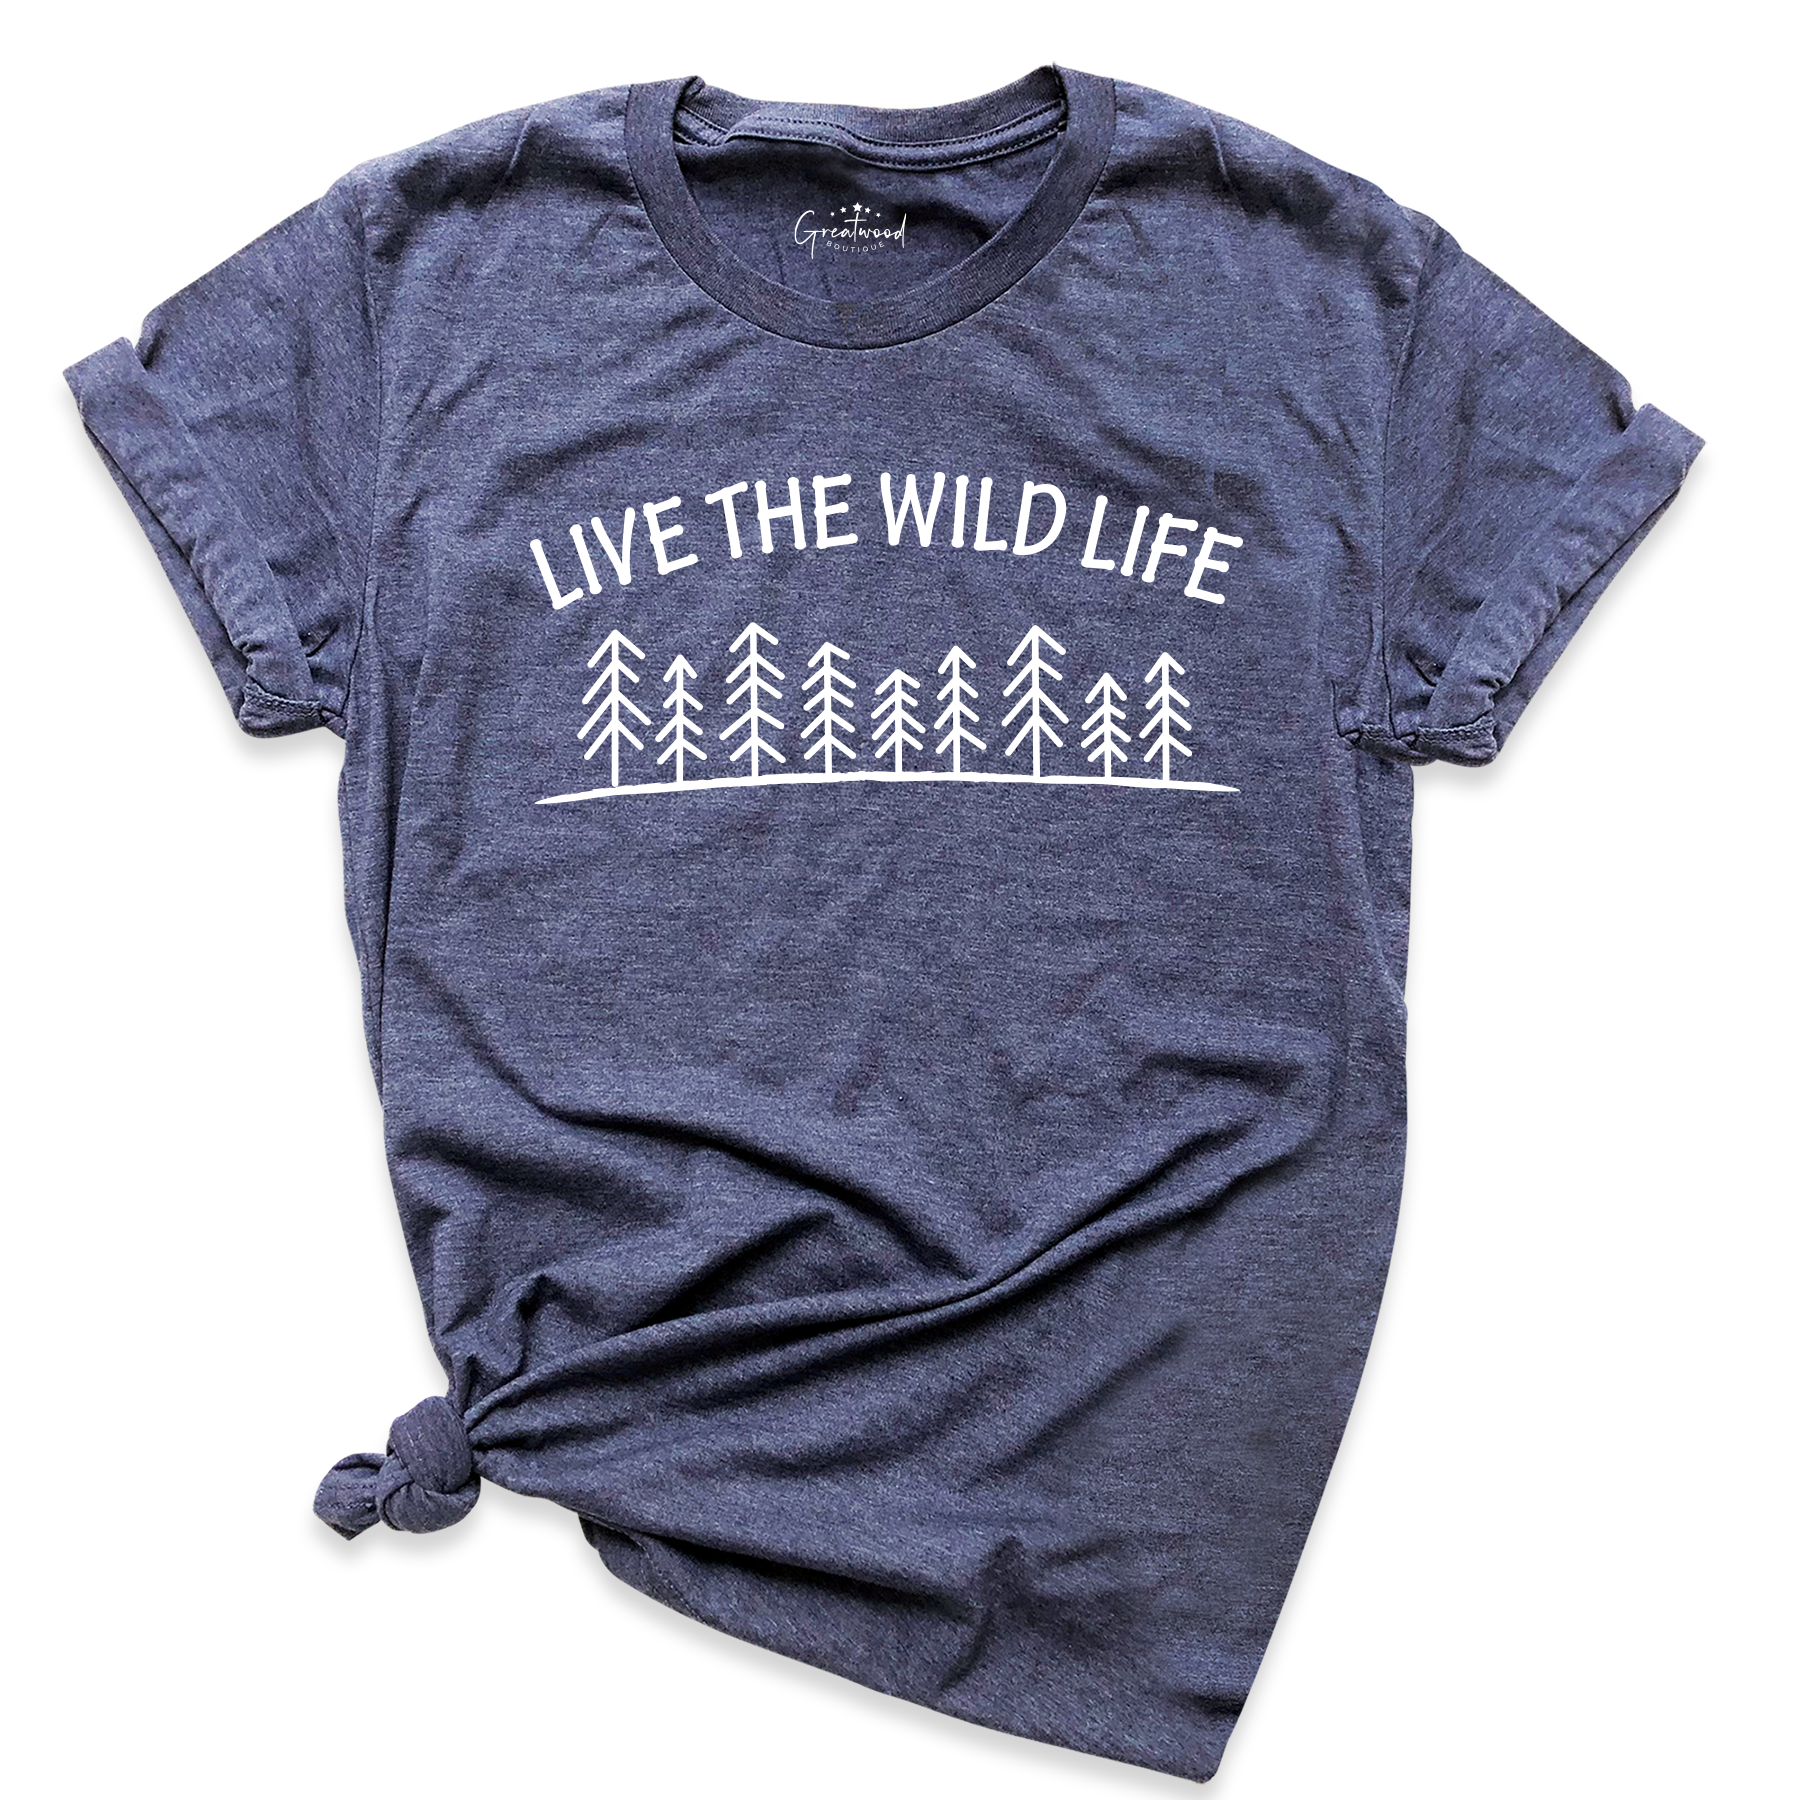 Live The Wild Life Shirt Navy - Greatwood Boutique